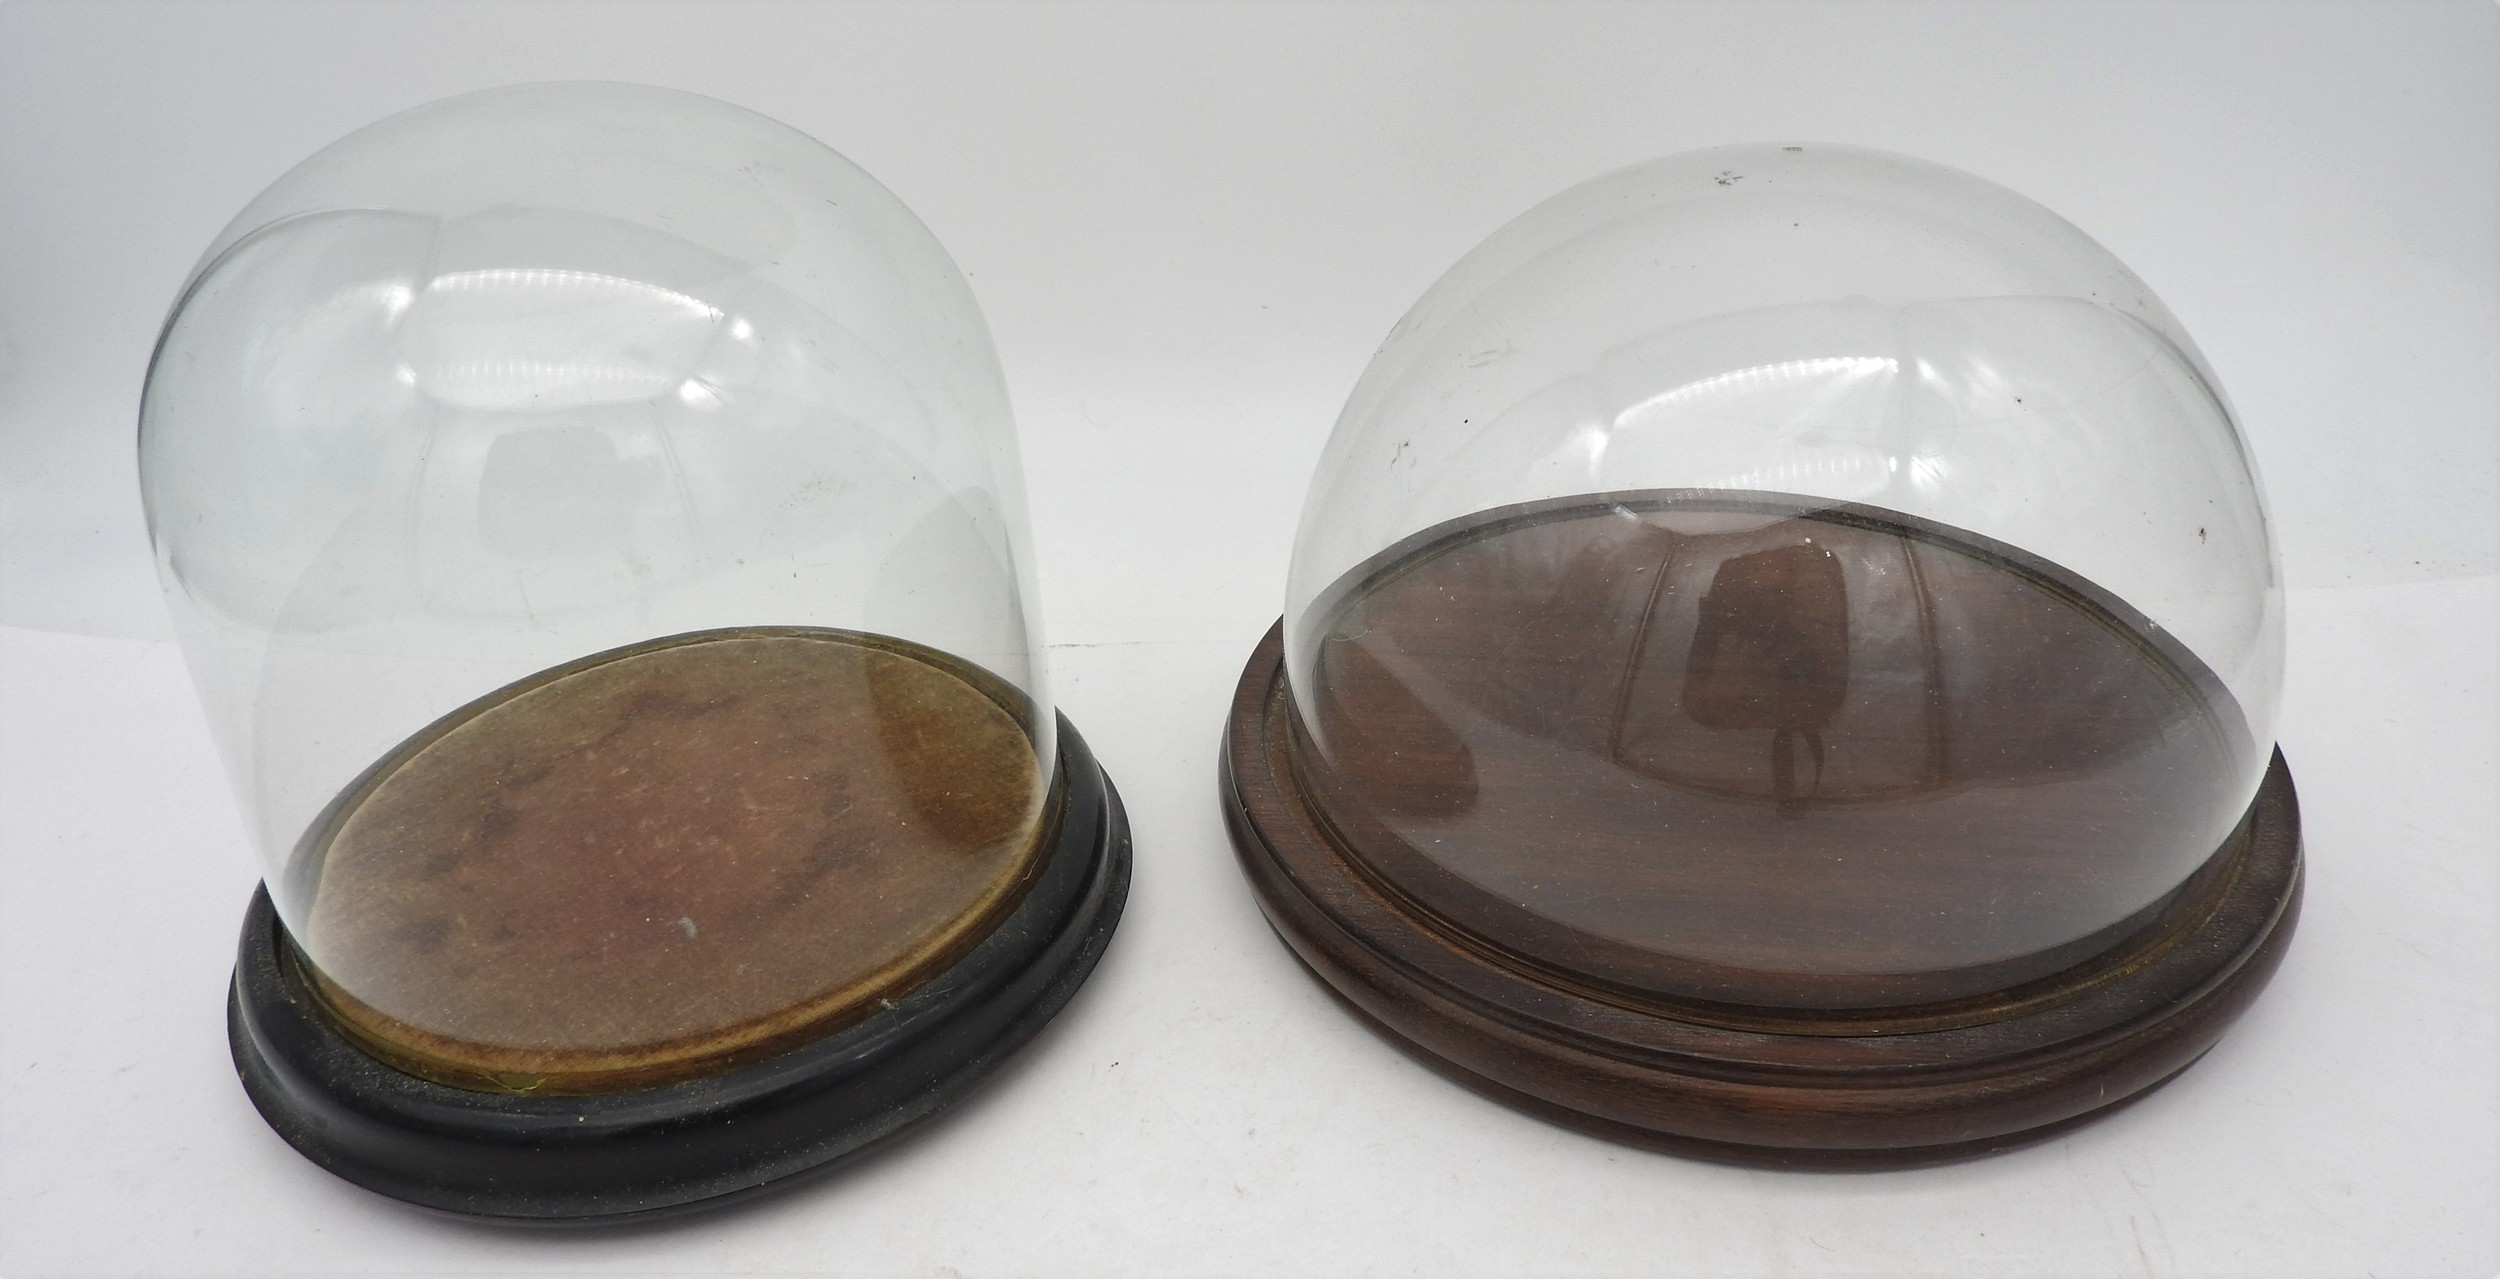 A SMALL VICTORIAN GLASS DOME ON AN EBONSED WOODEN BASE and a small modern glass dome 17 cms high